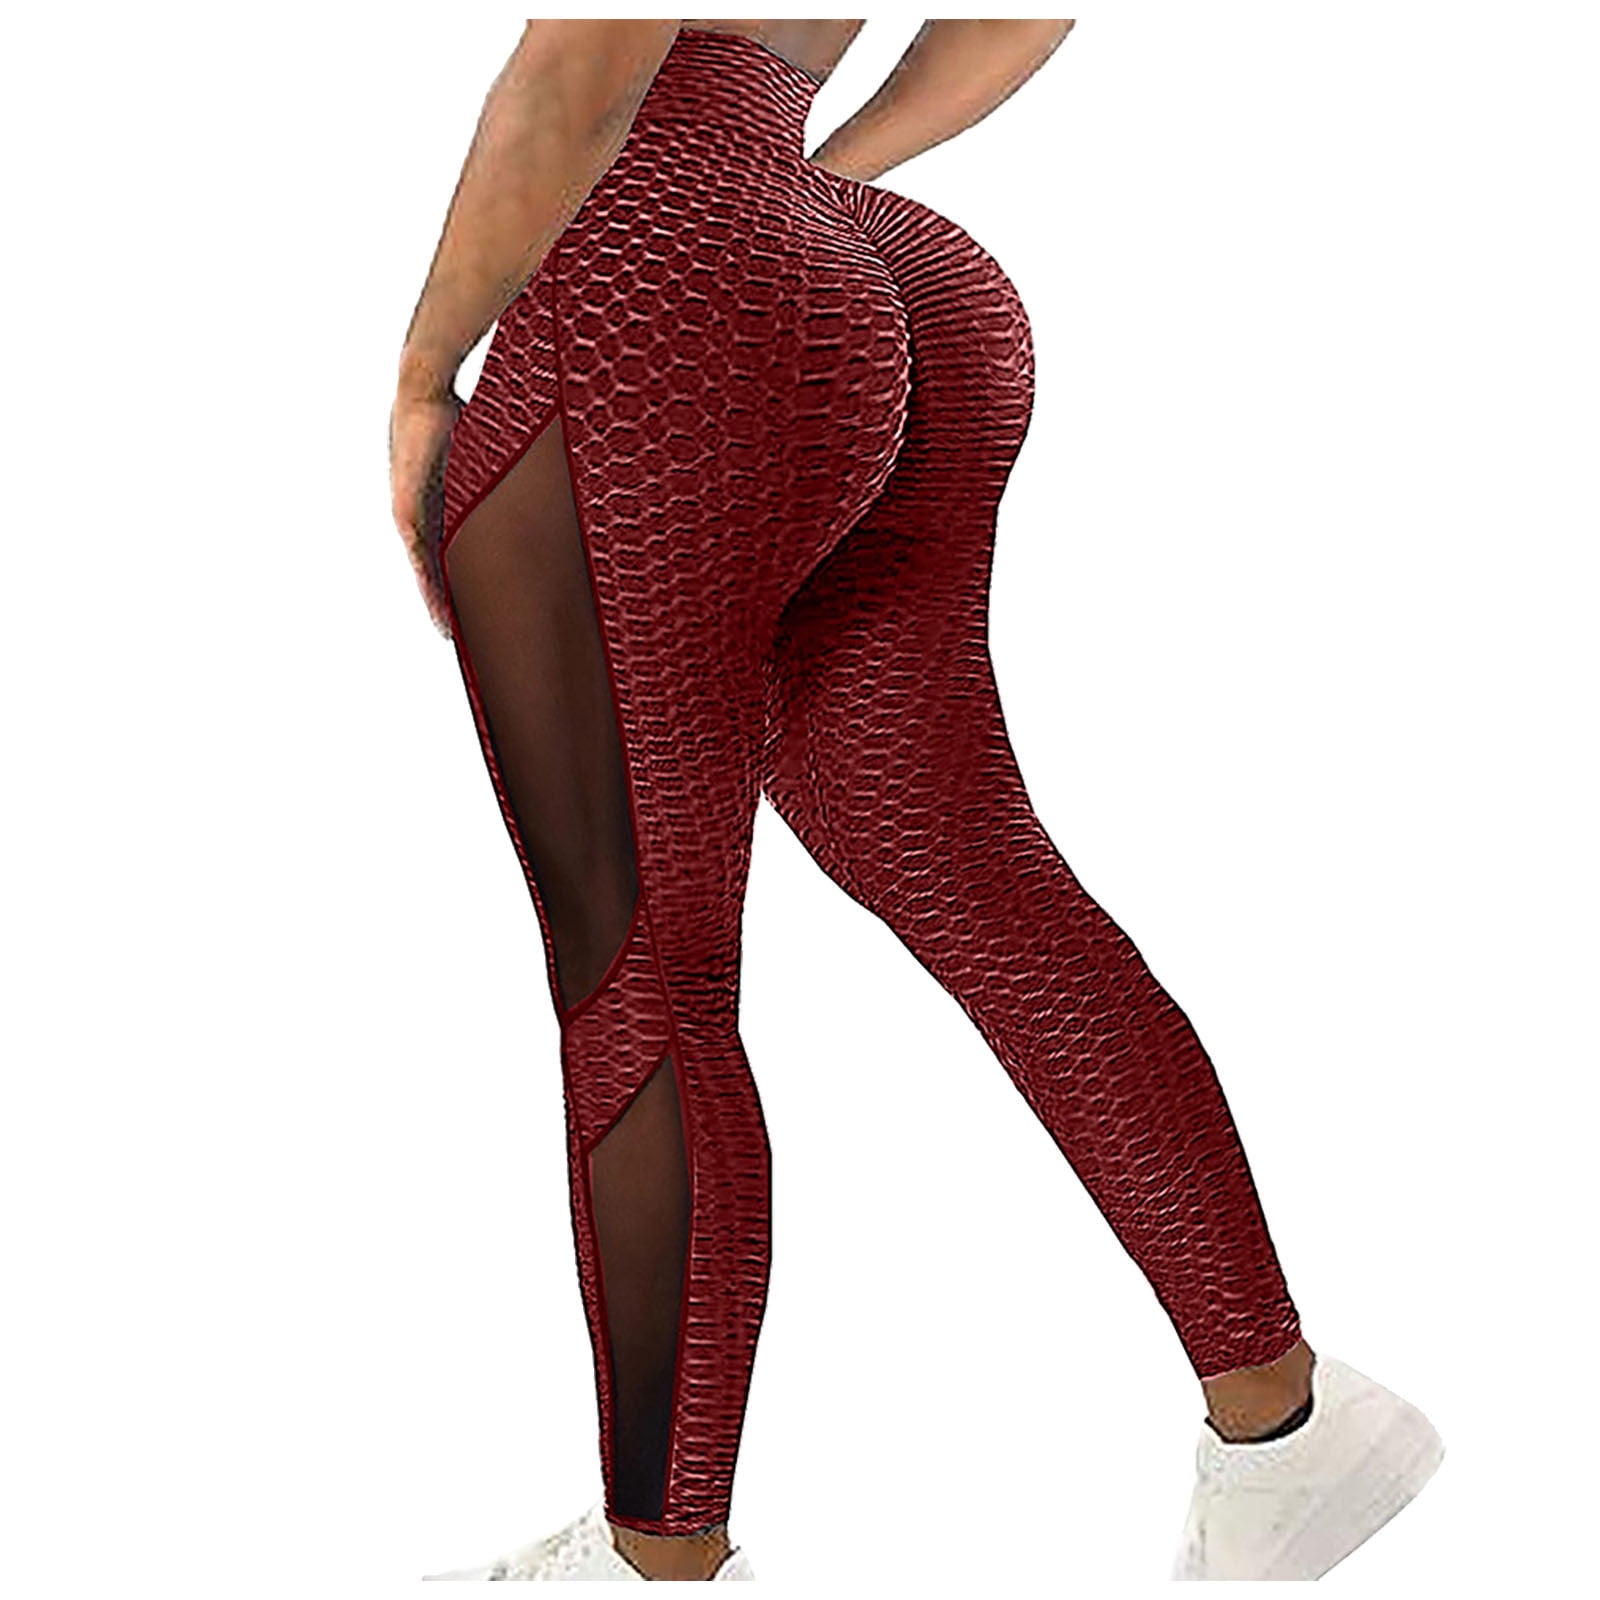 Womens High Waist Camo Yoga Pants Butt Lifting Tummy Control Slimming Booty Leggings Workout Running Tights 